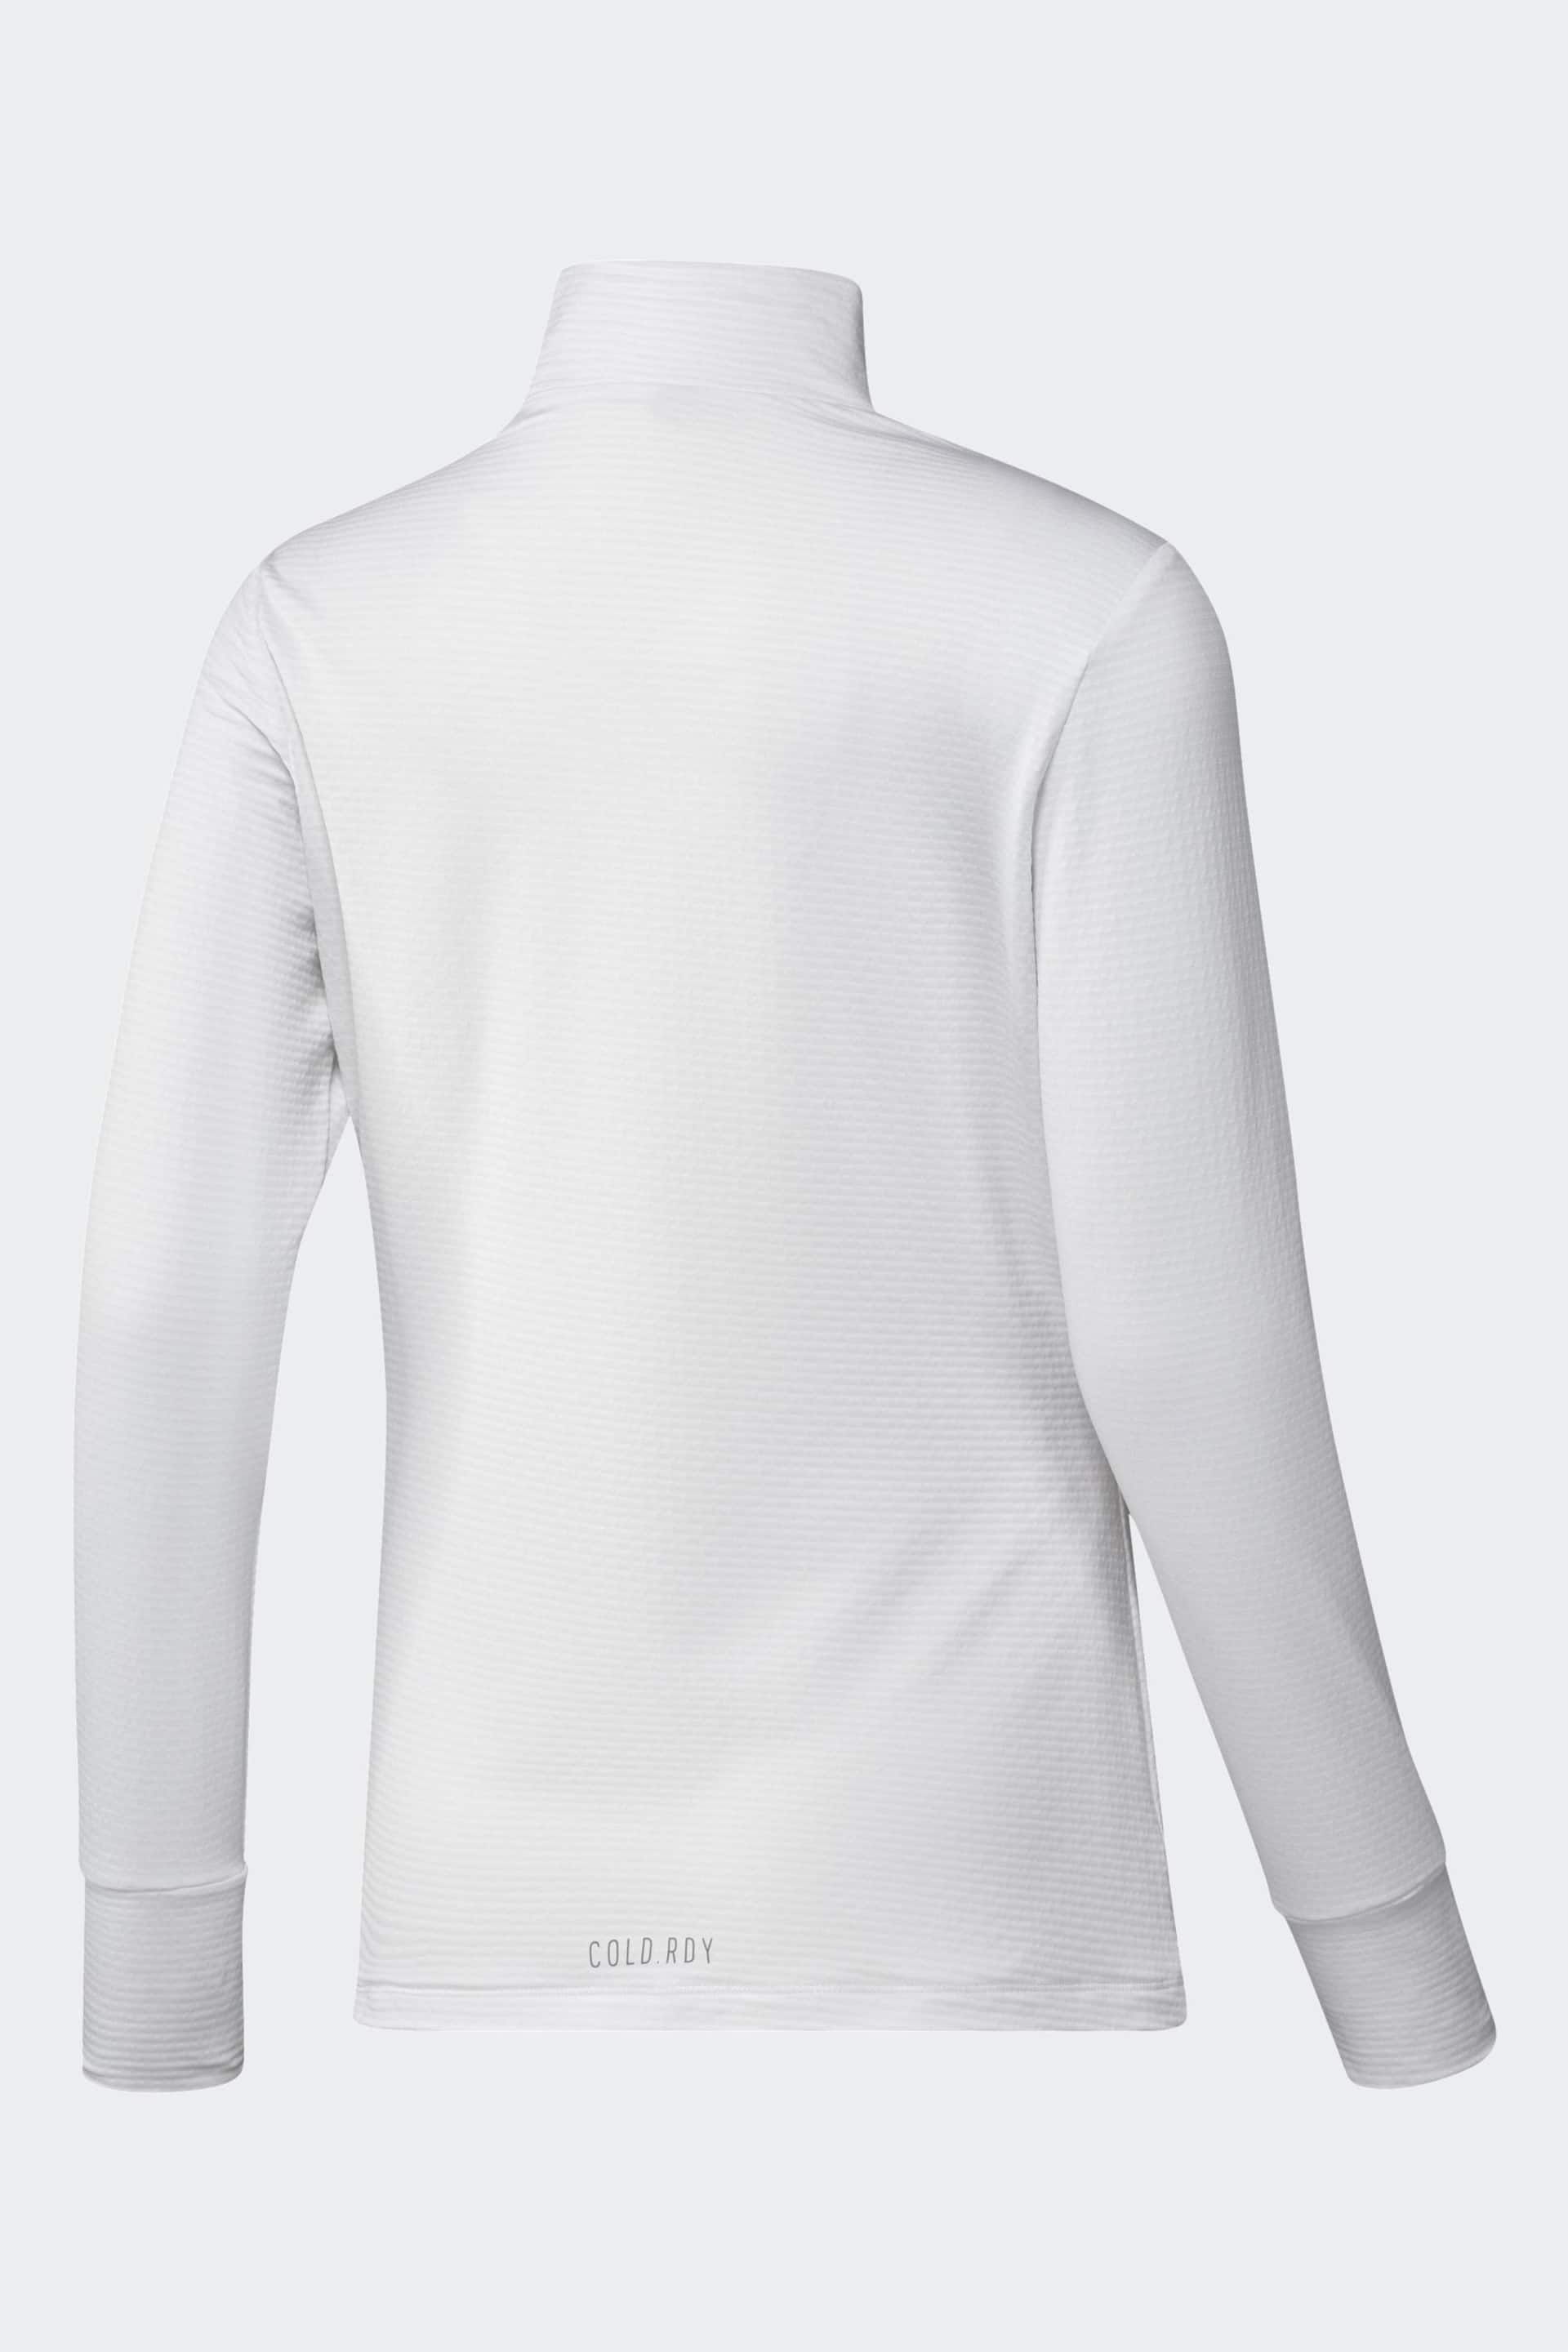 adidas Golf COLD.RDY Long Sleeve Mock T-shirt - Image 7 of 7